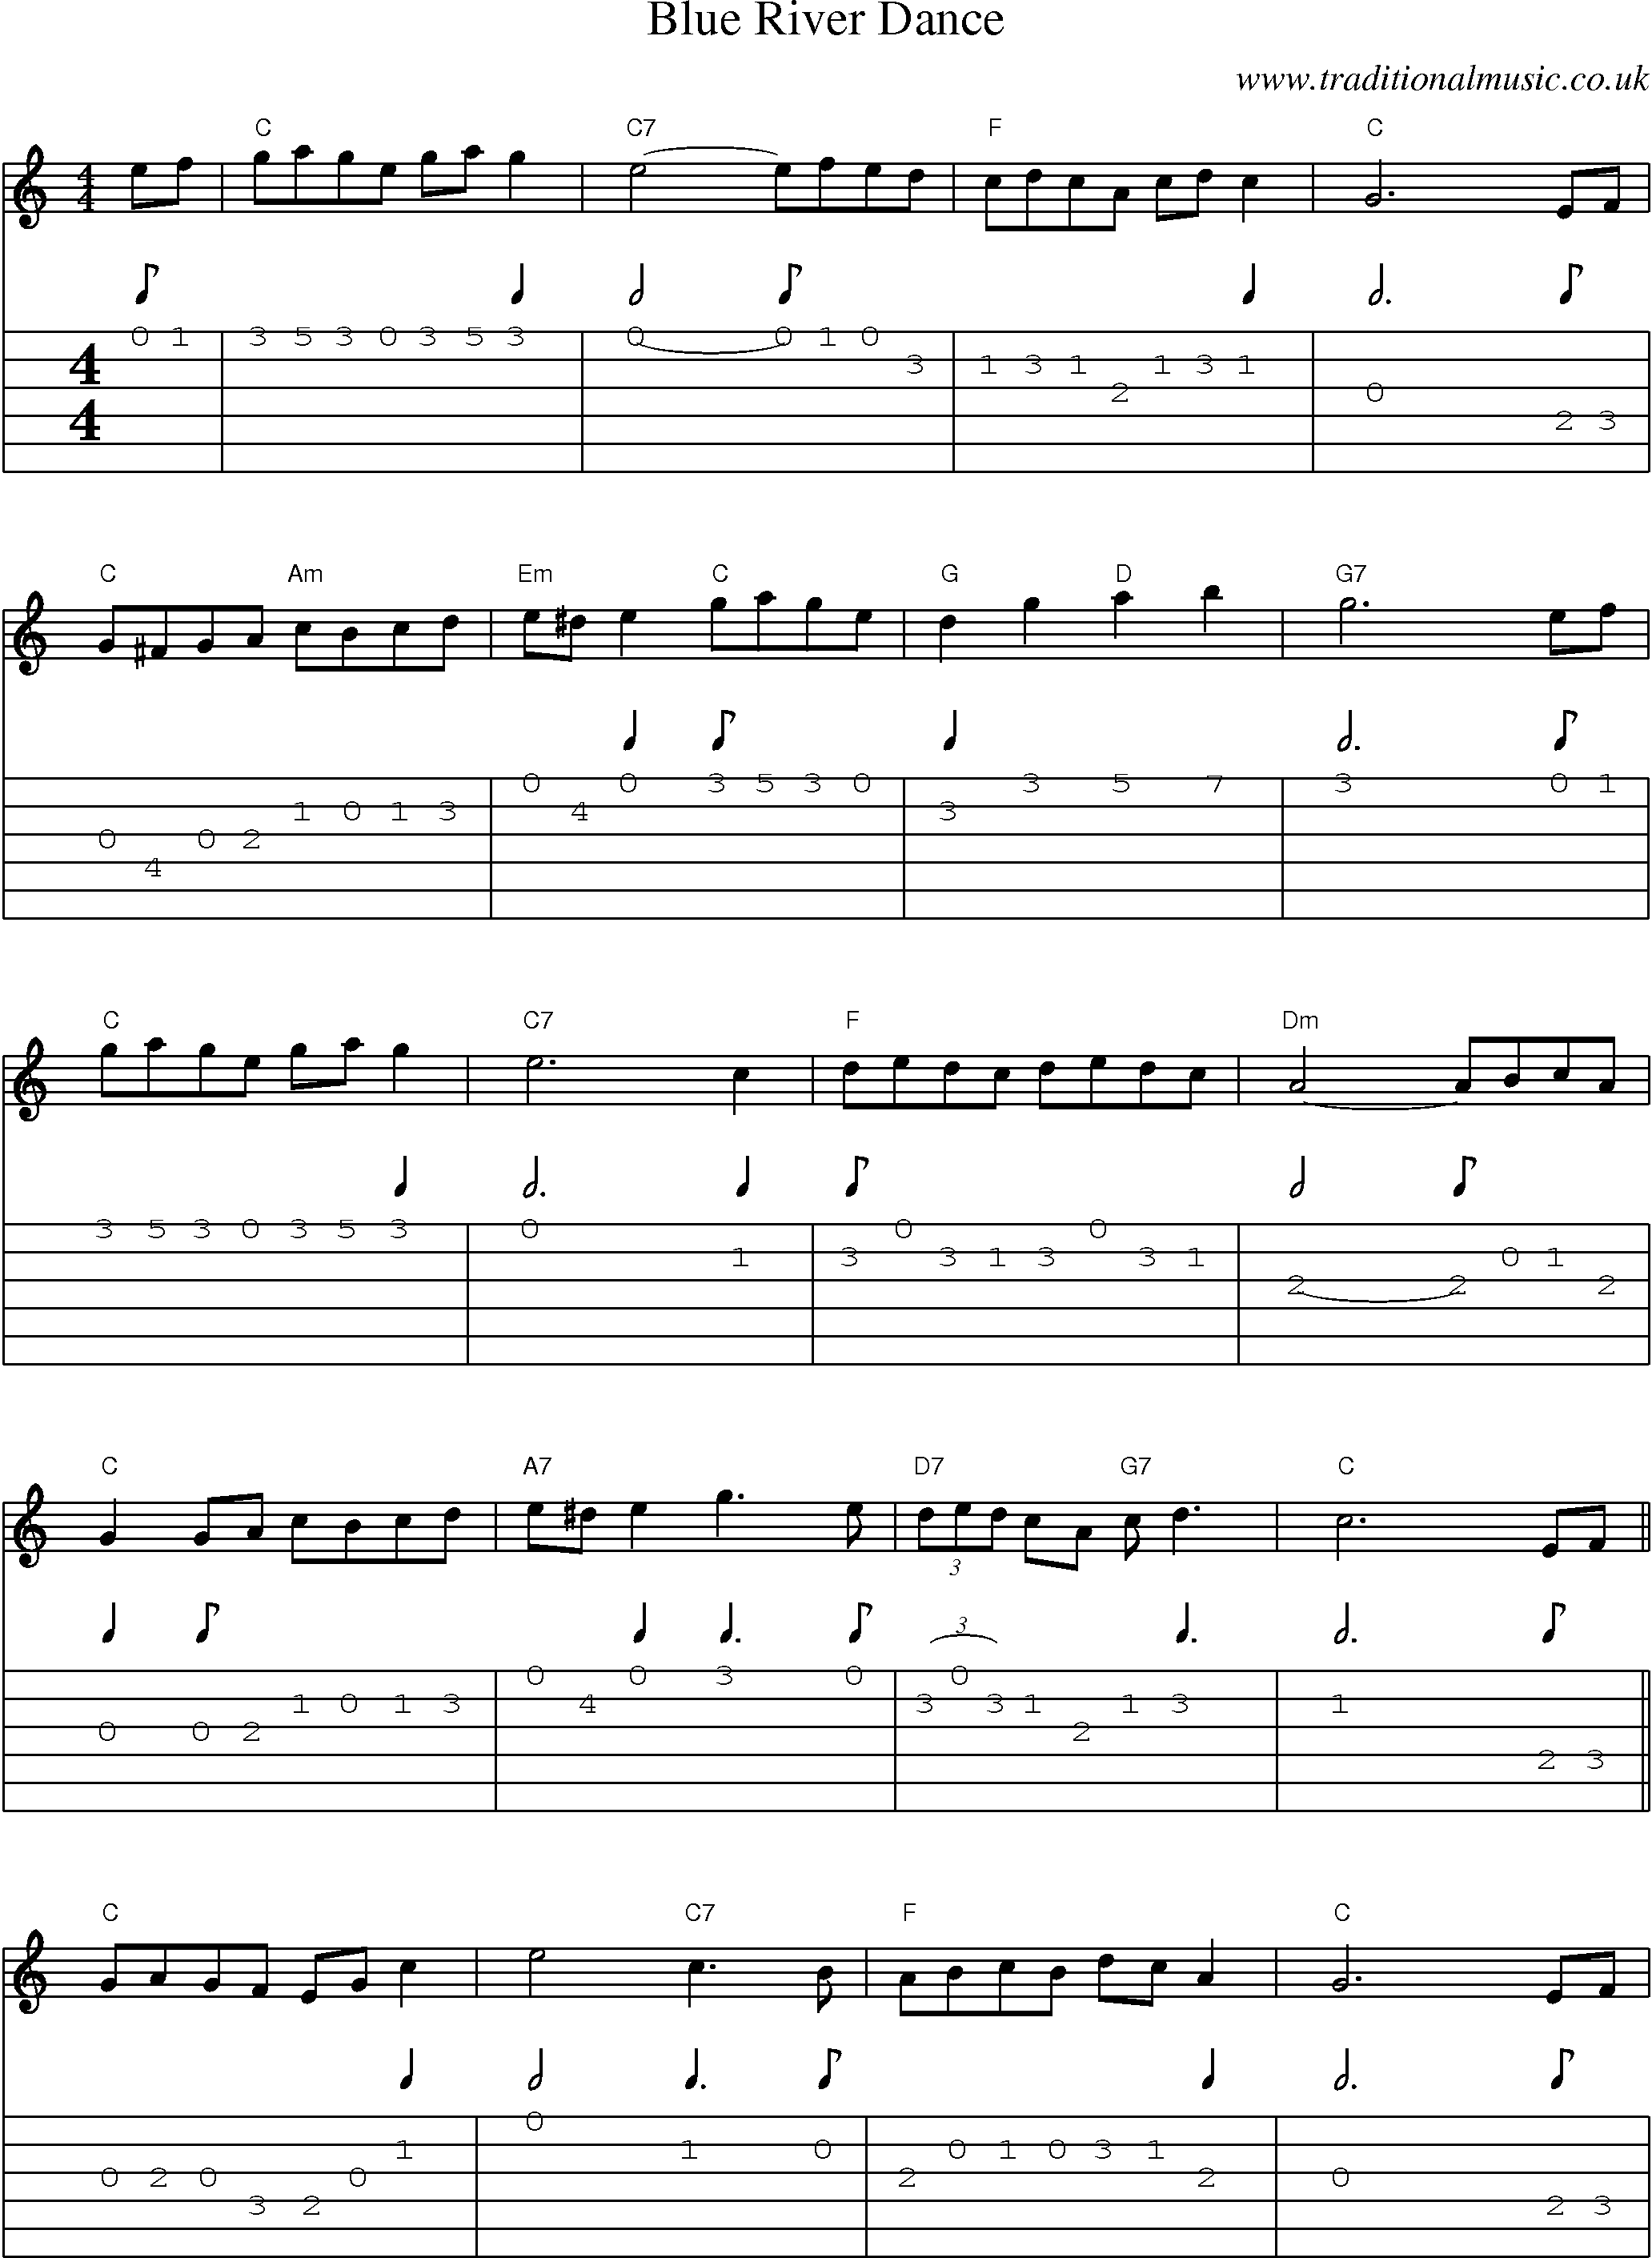 Music Score and Guitar Tabs for Blue River Dance